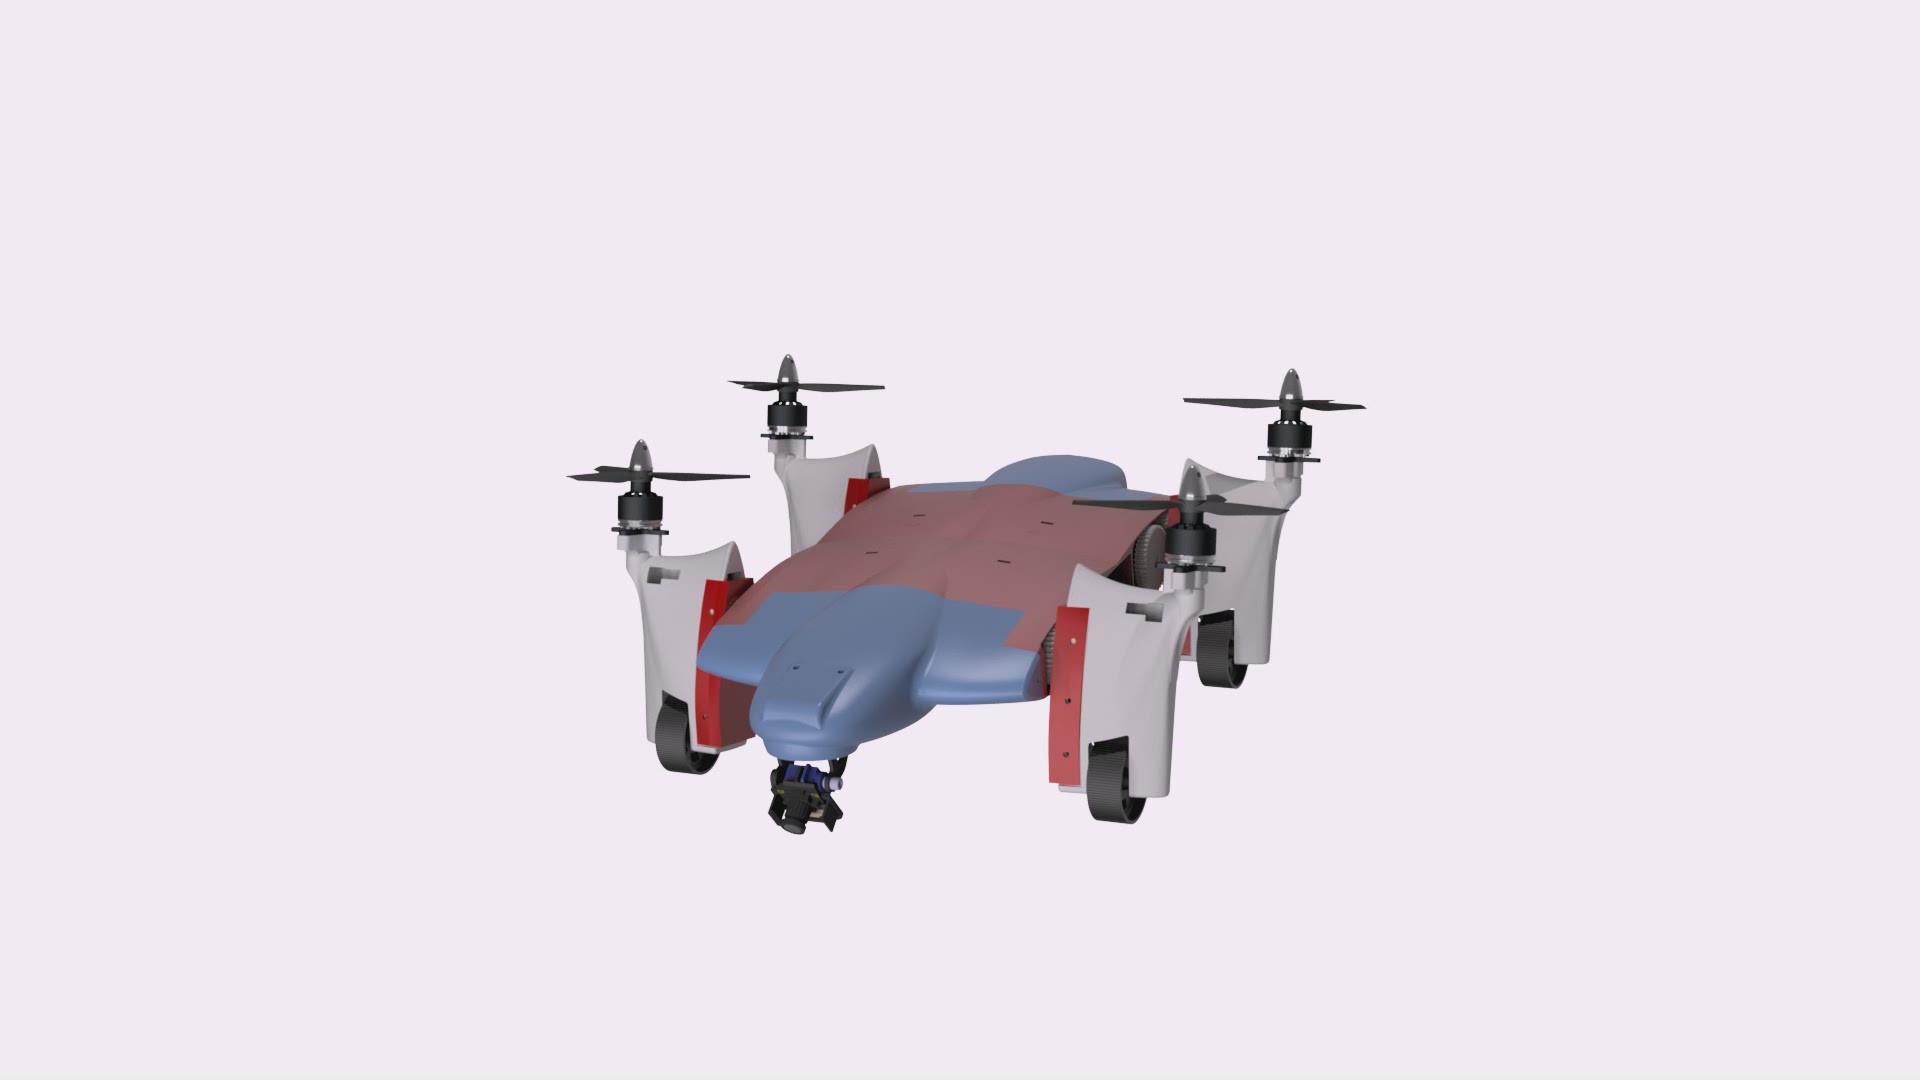 UMD-based company, Airgility, is designing a drone to help first responders in mass casualty situations